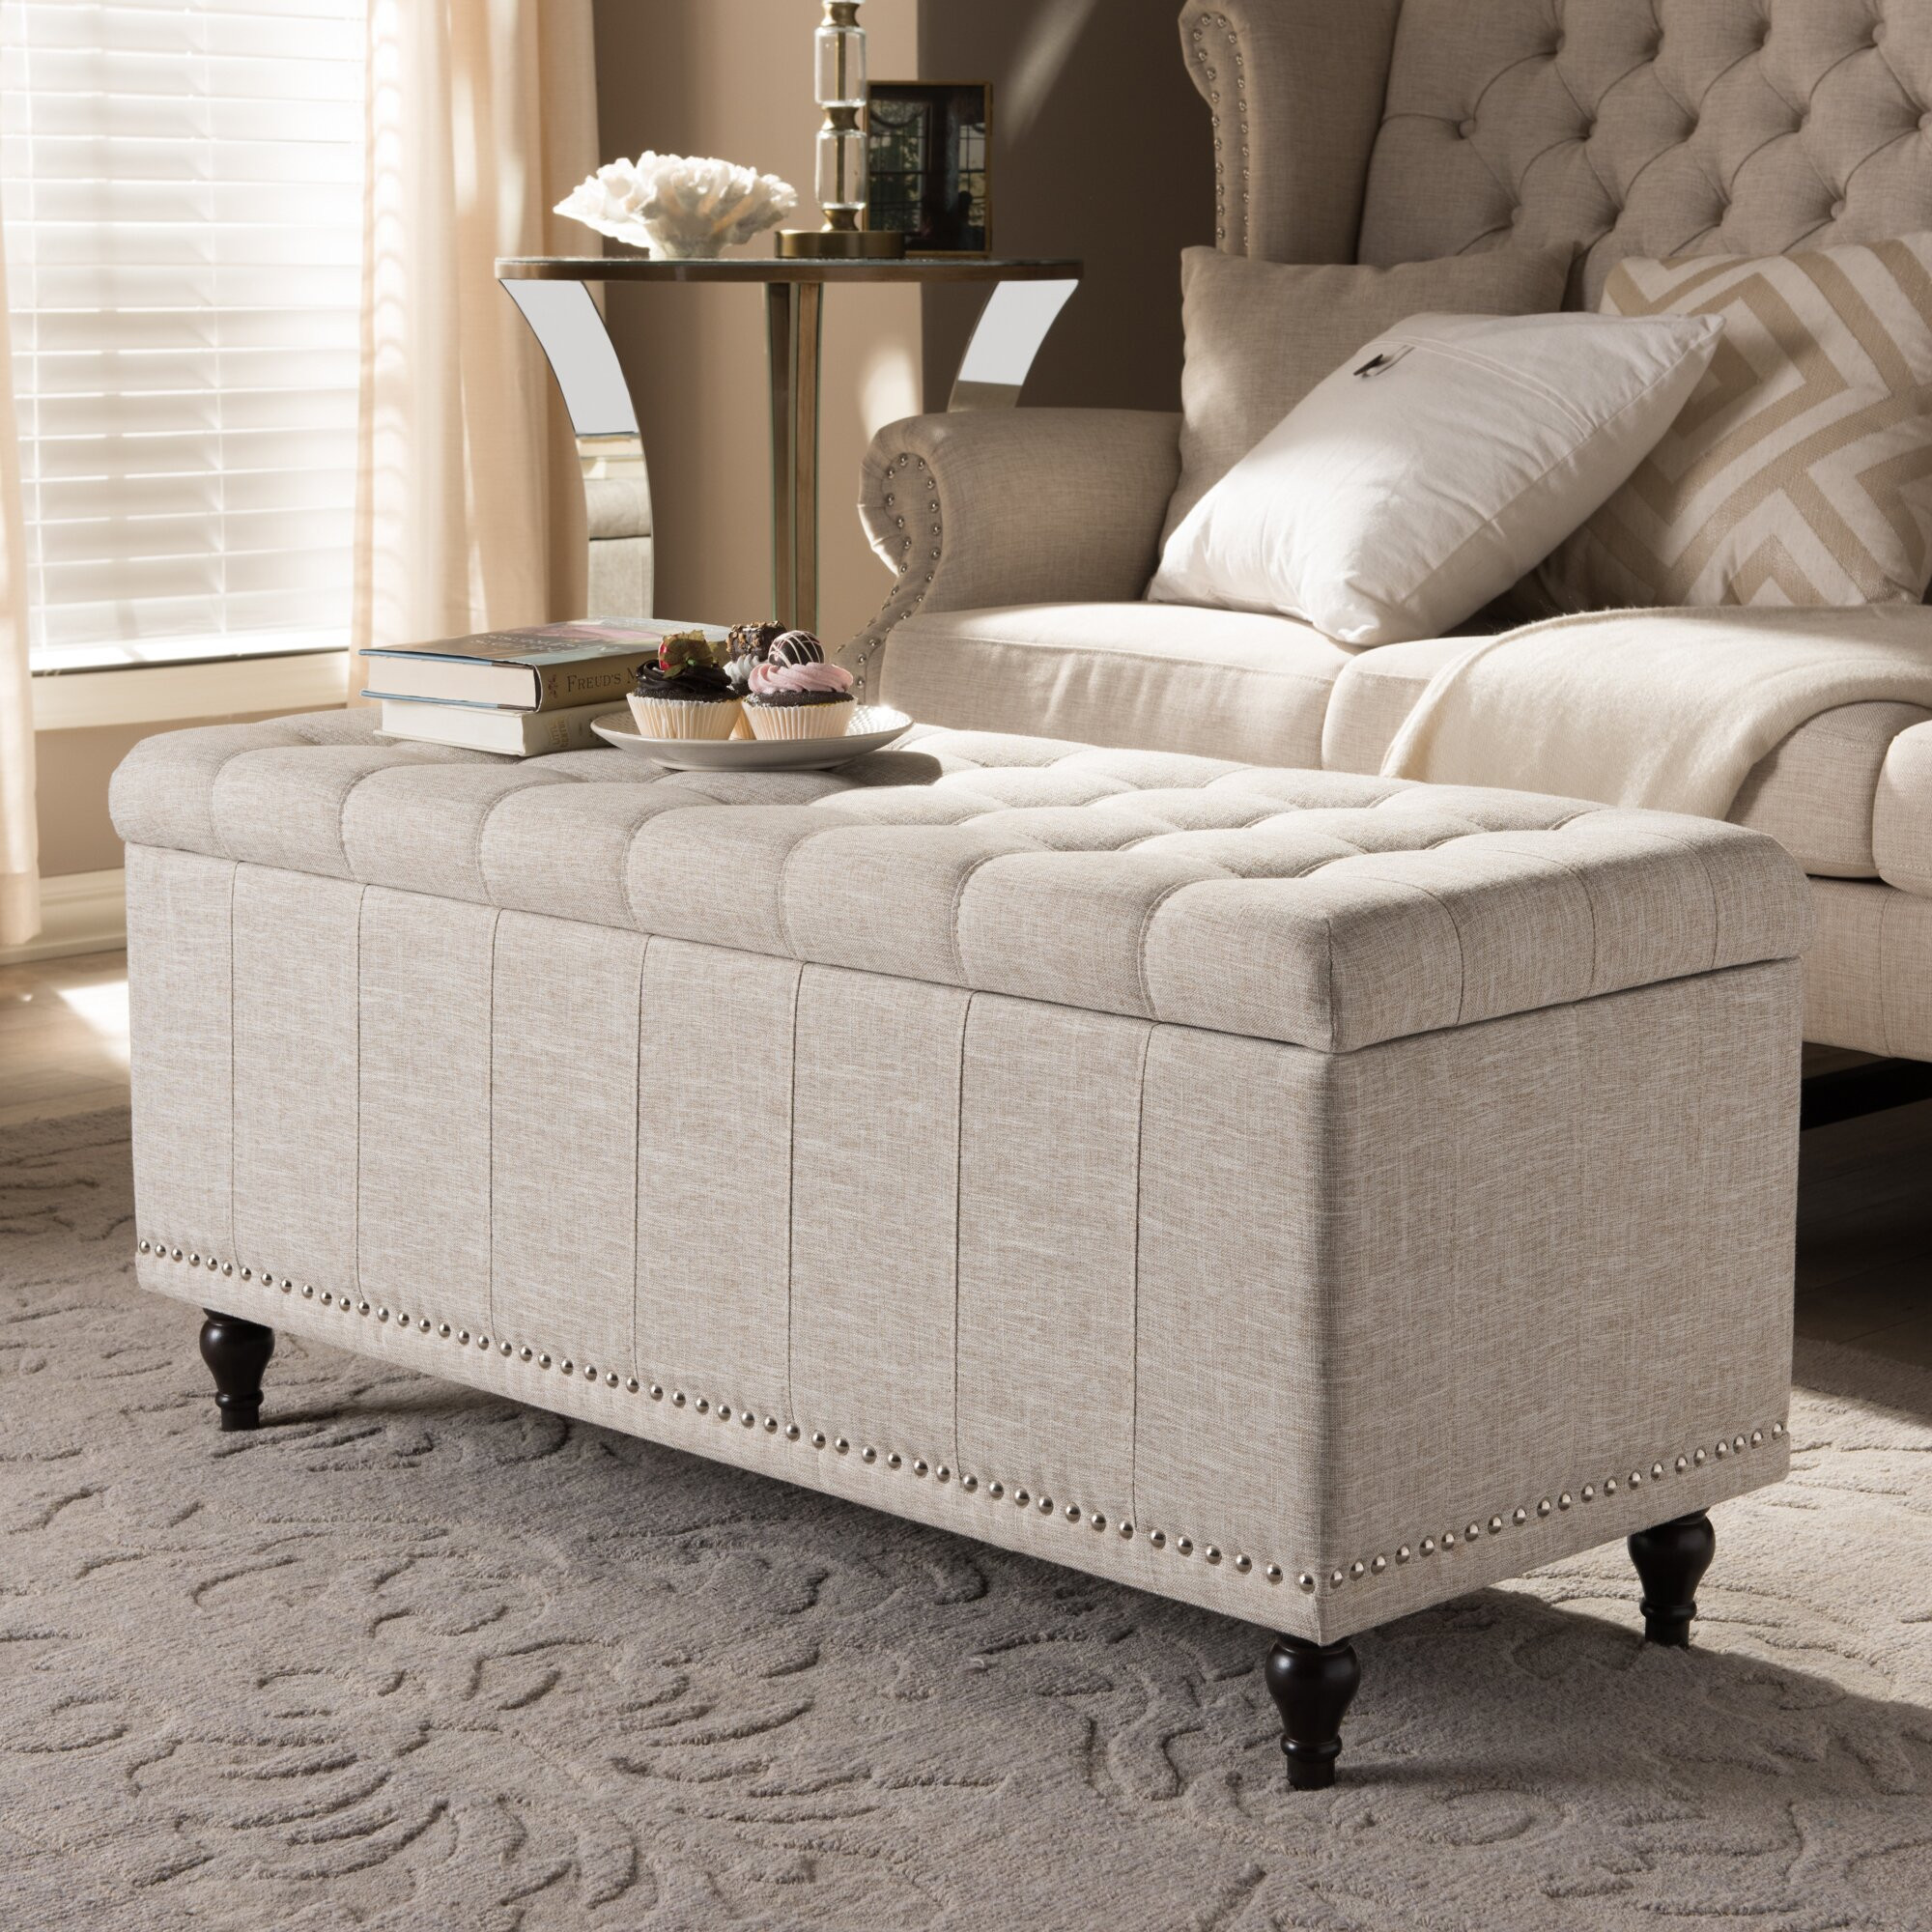 Storage Benches For Bedroom
 Wholesale Interiors Baxton Studio Luca Upholstered Storage